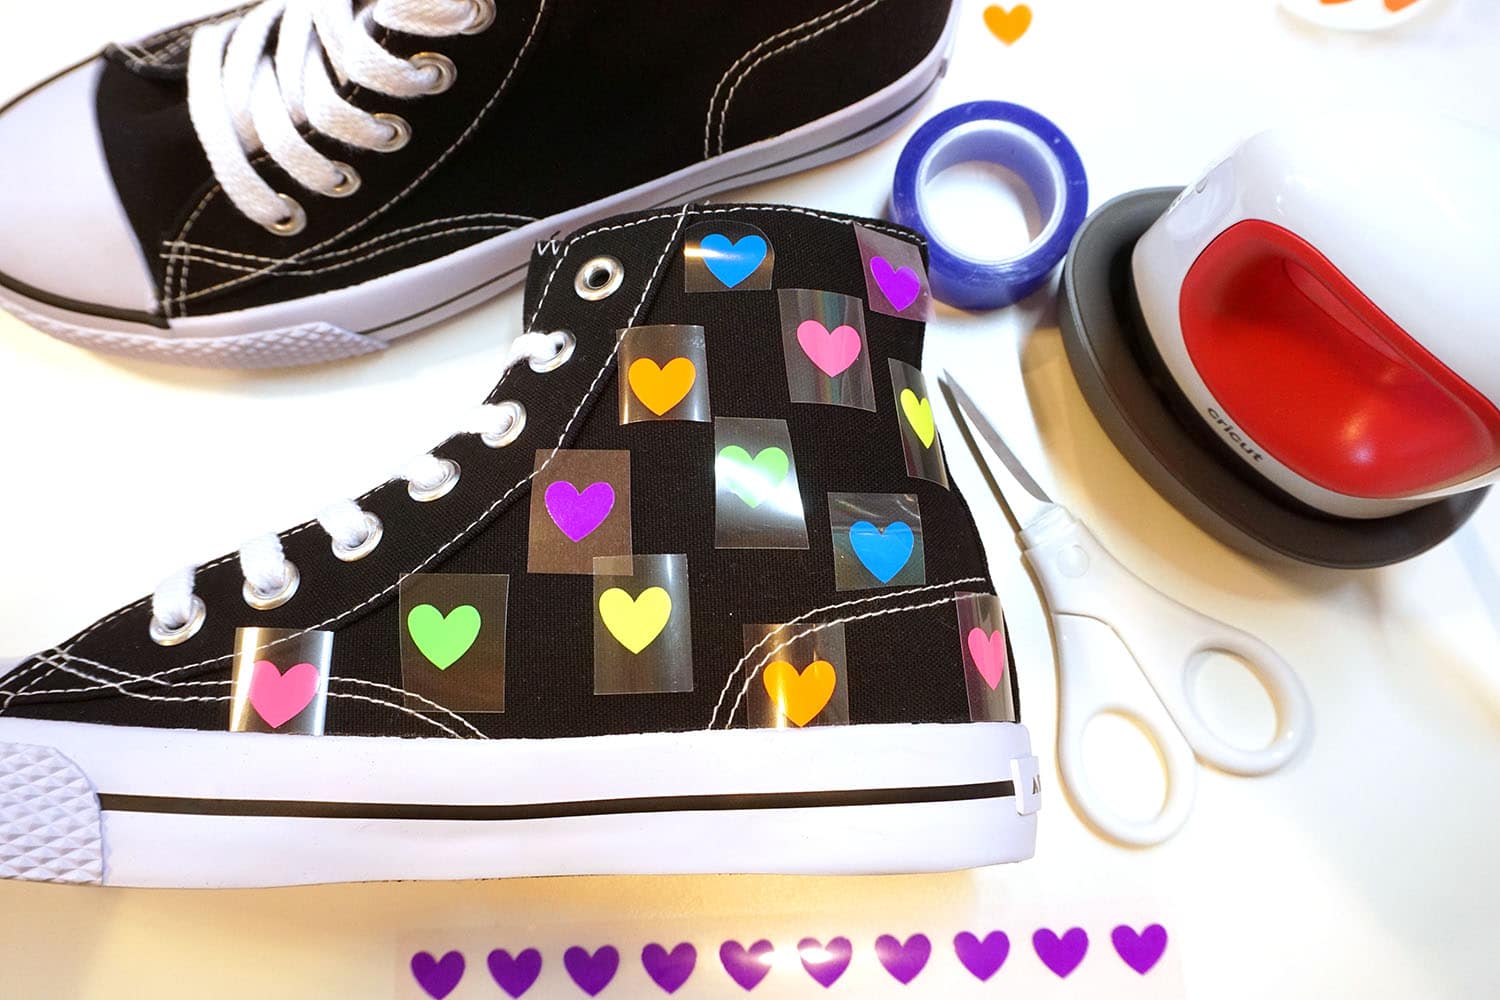 iron on heart applied to shoes